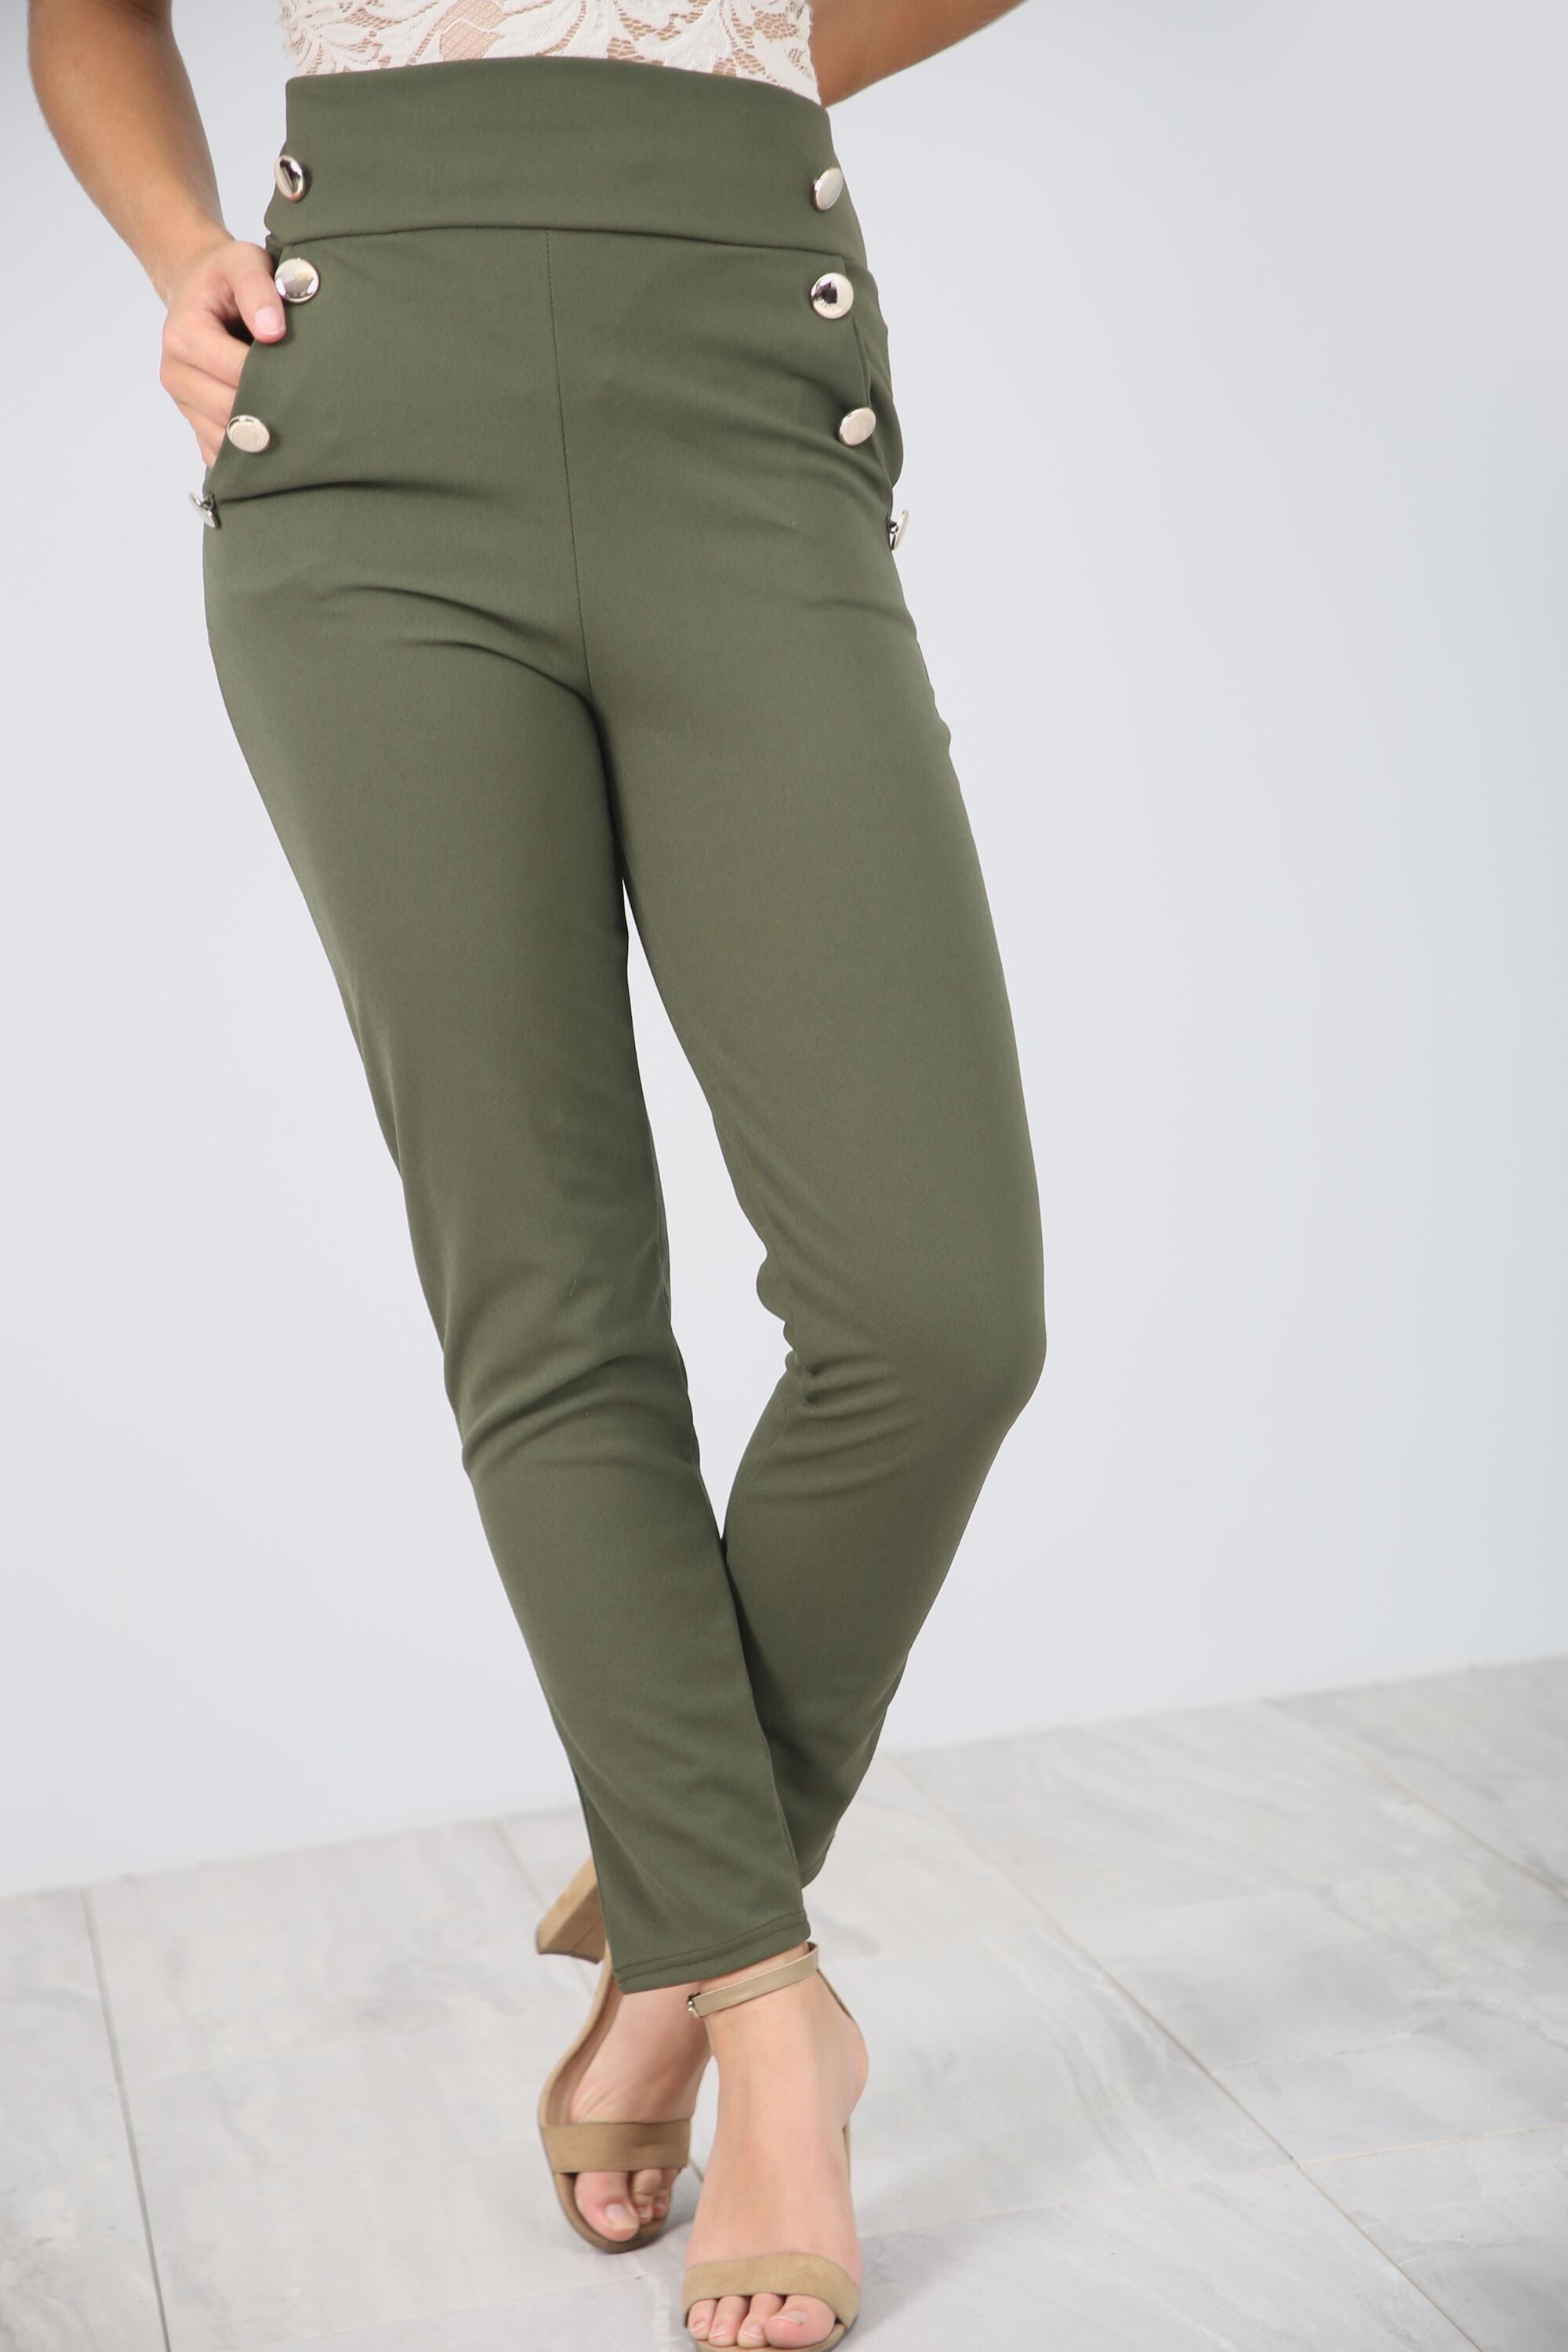 High Waisted Gold Button Navy Cigarette Trousers - bejealous-com